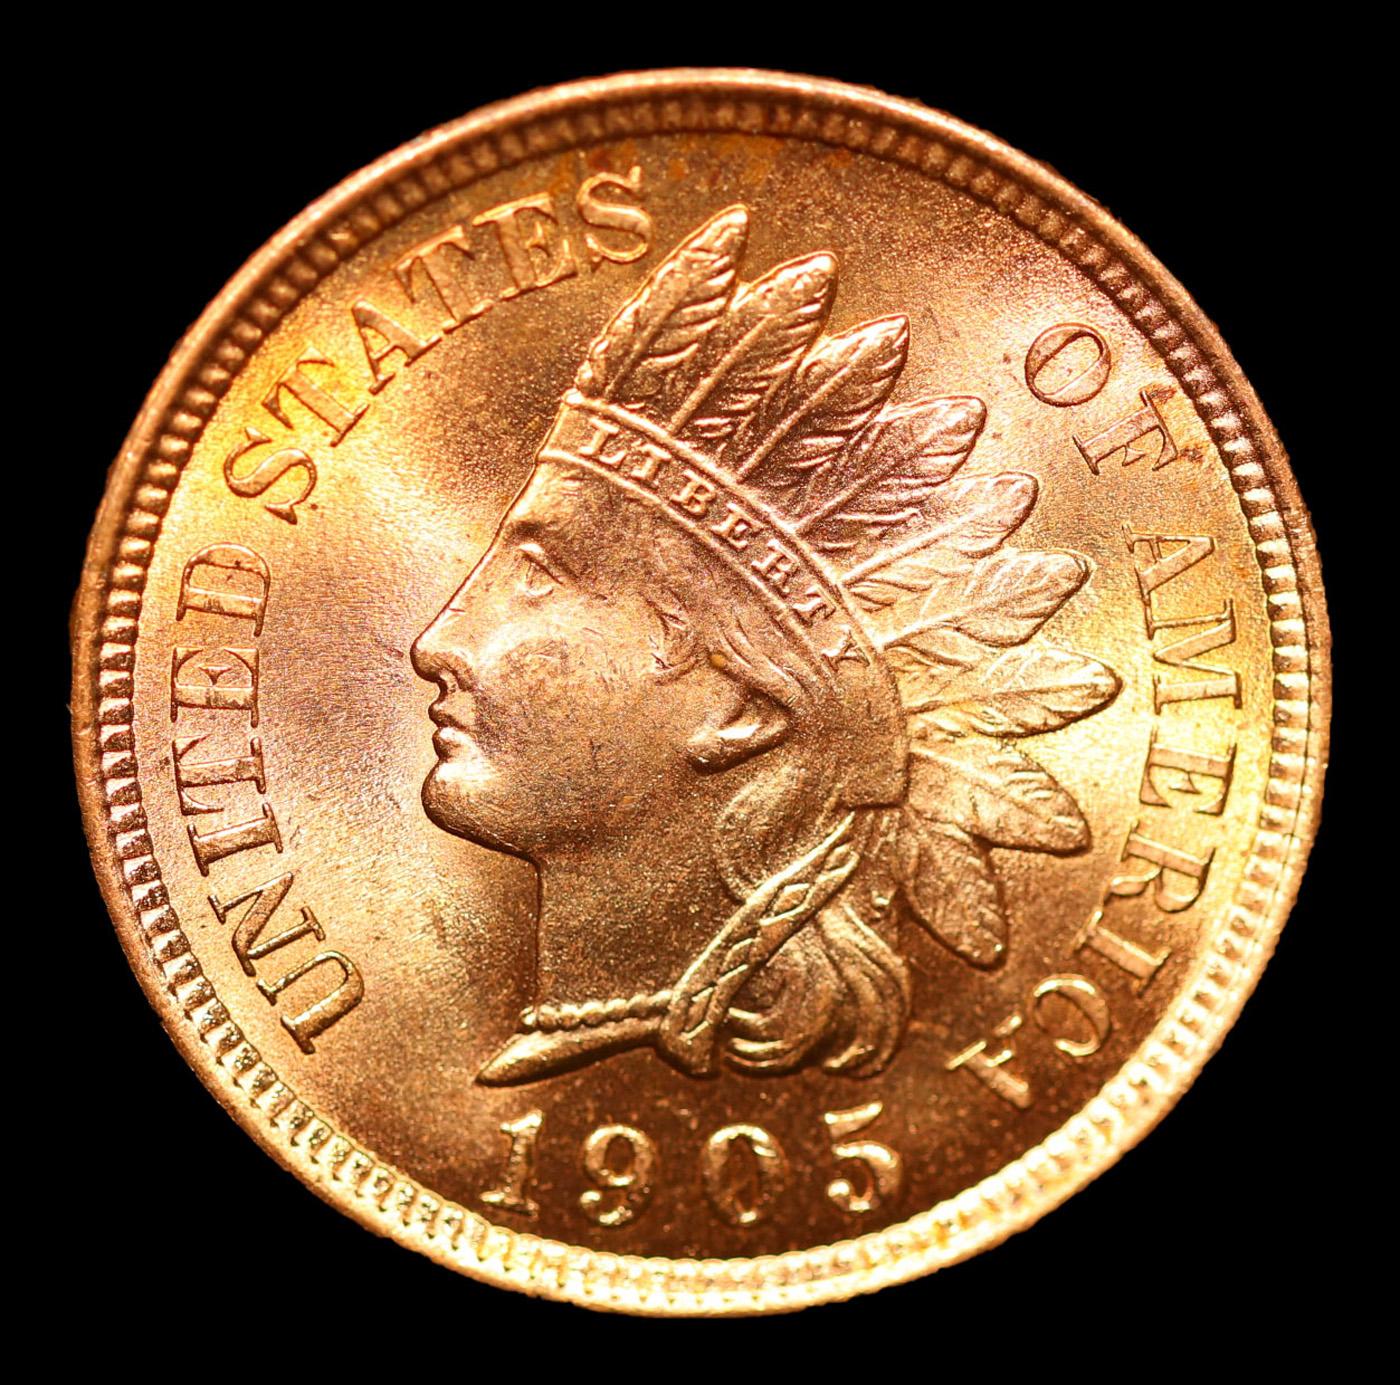 ***Auction Highlight*** 1905 Indian Cent TOP POP! 1c Graded ms67 rd By SEGS (fc)